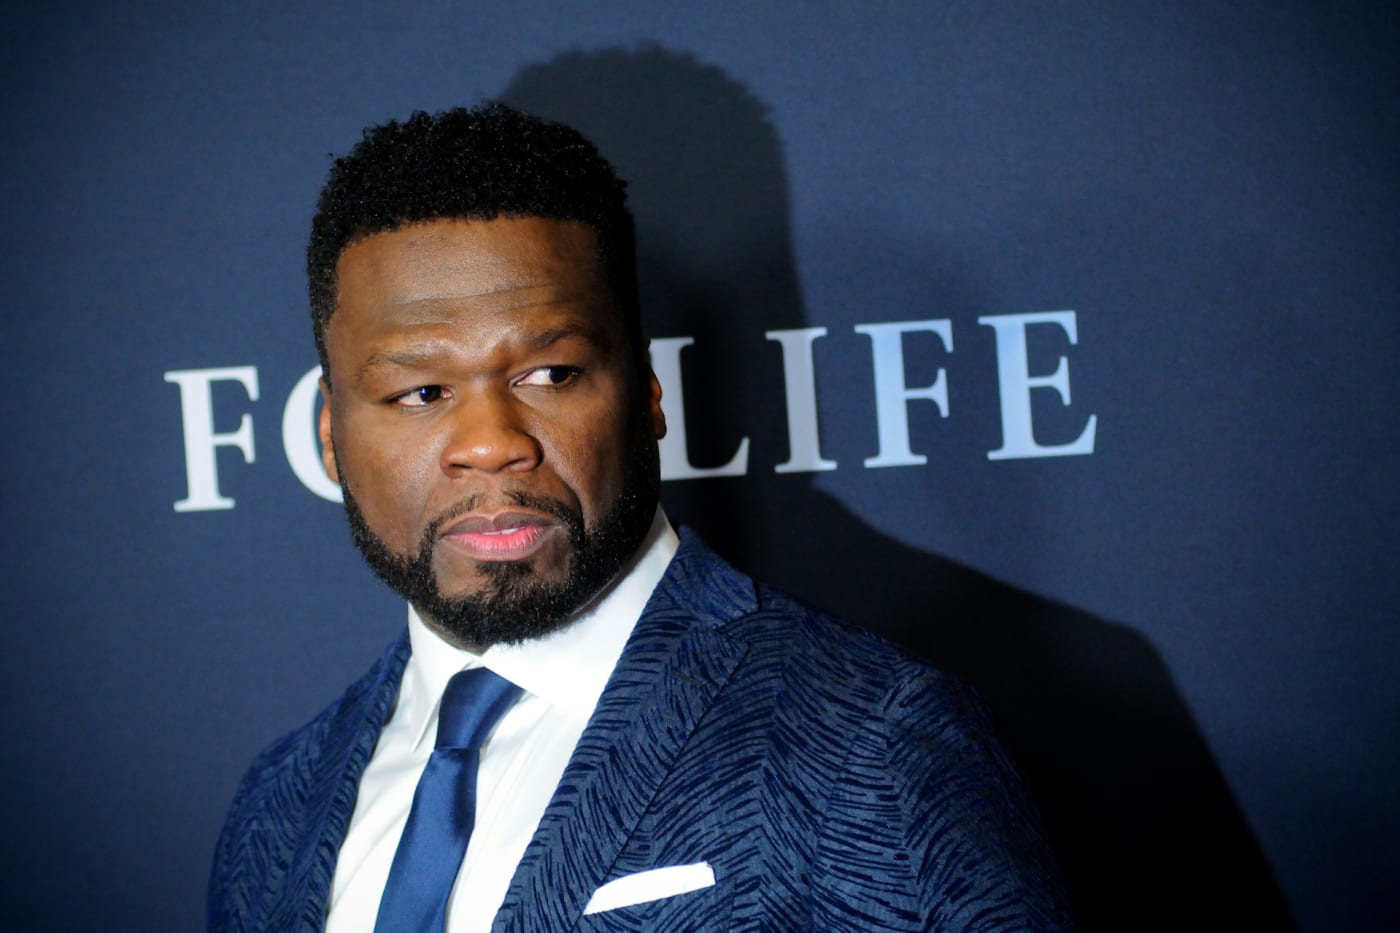 50 Cent (Curtis Jackson) attends the "For Life" TV Series Premiere.